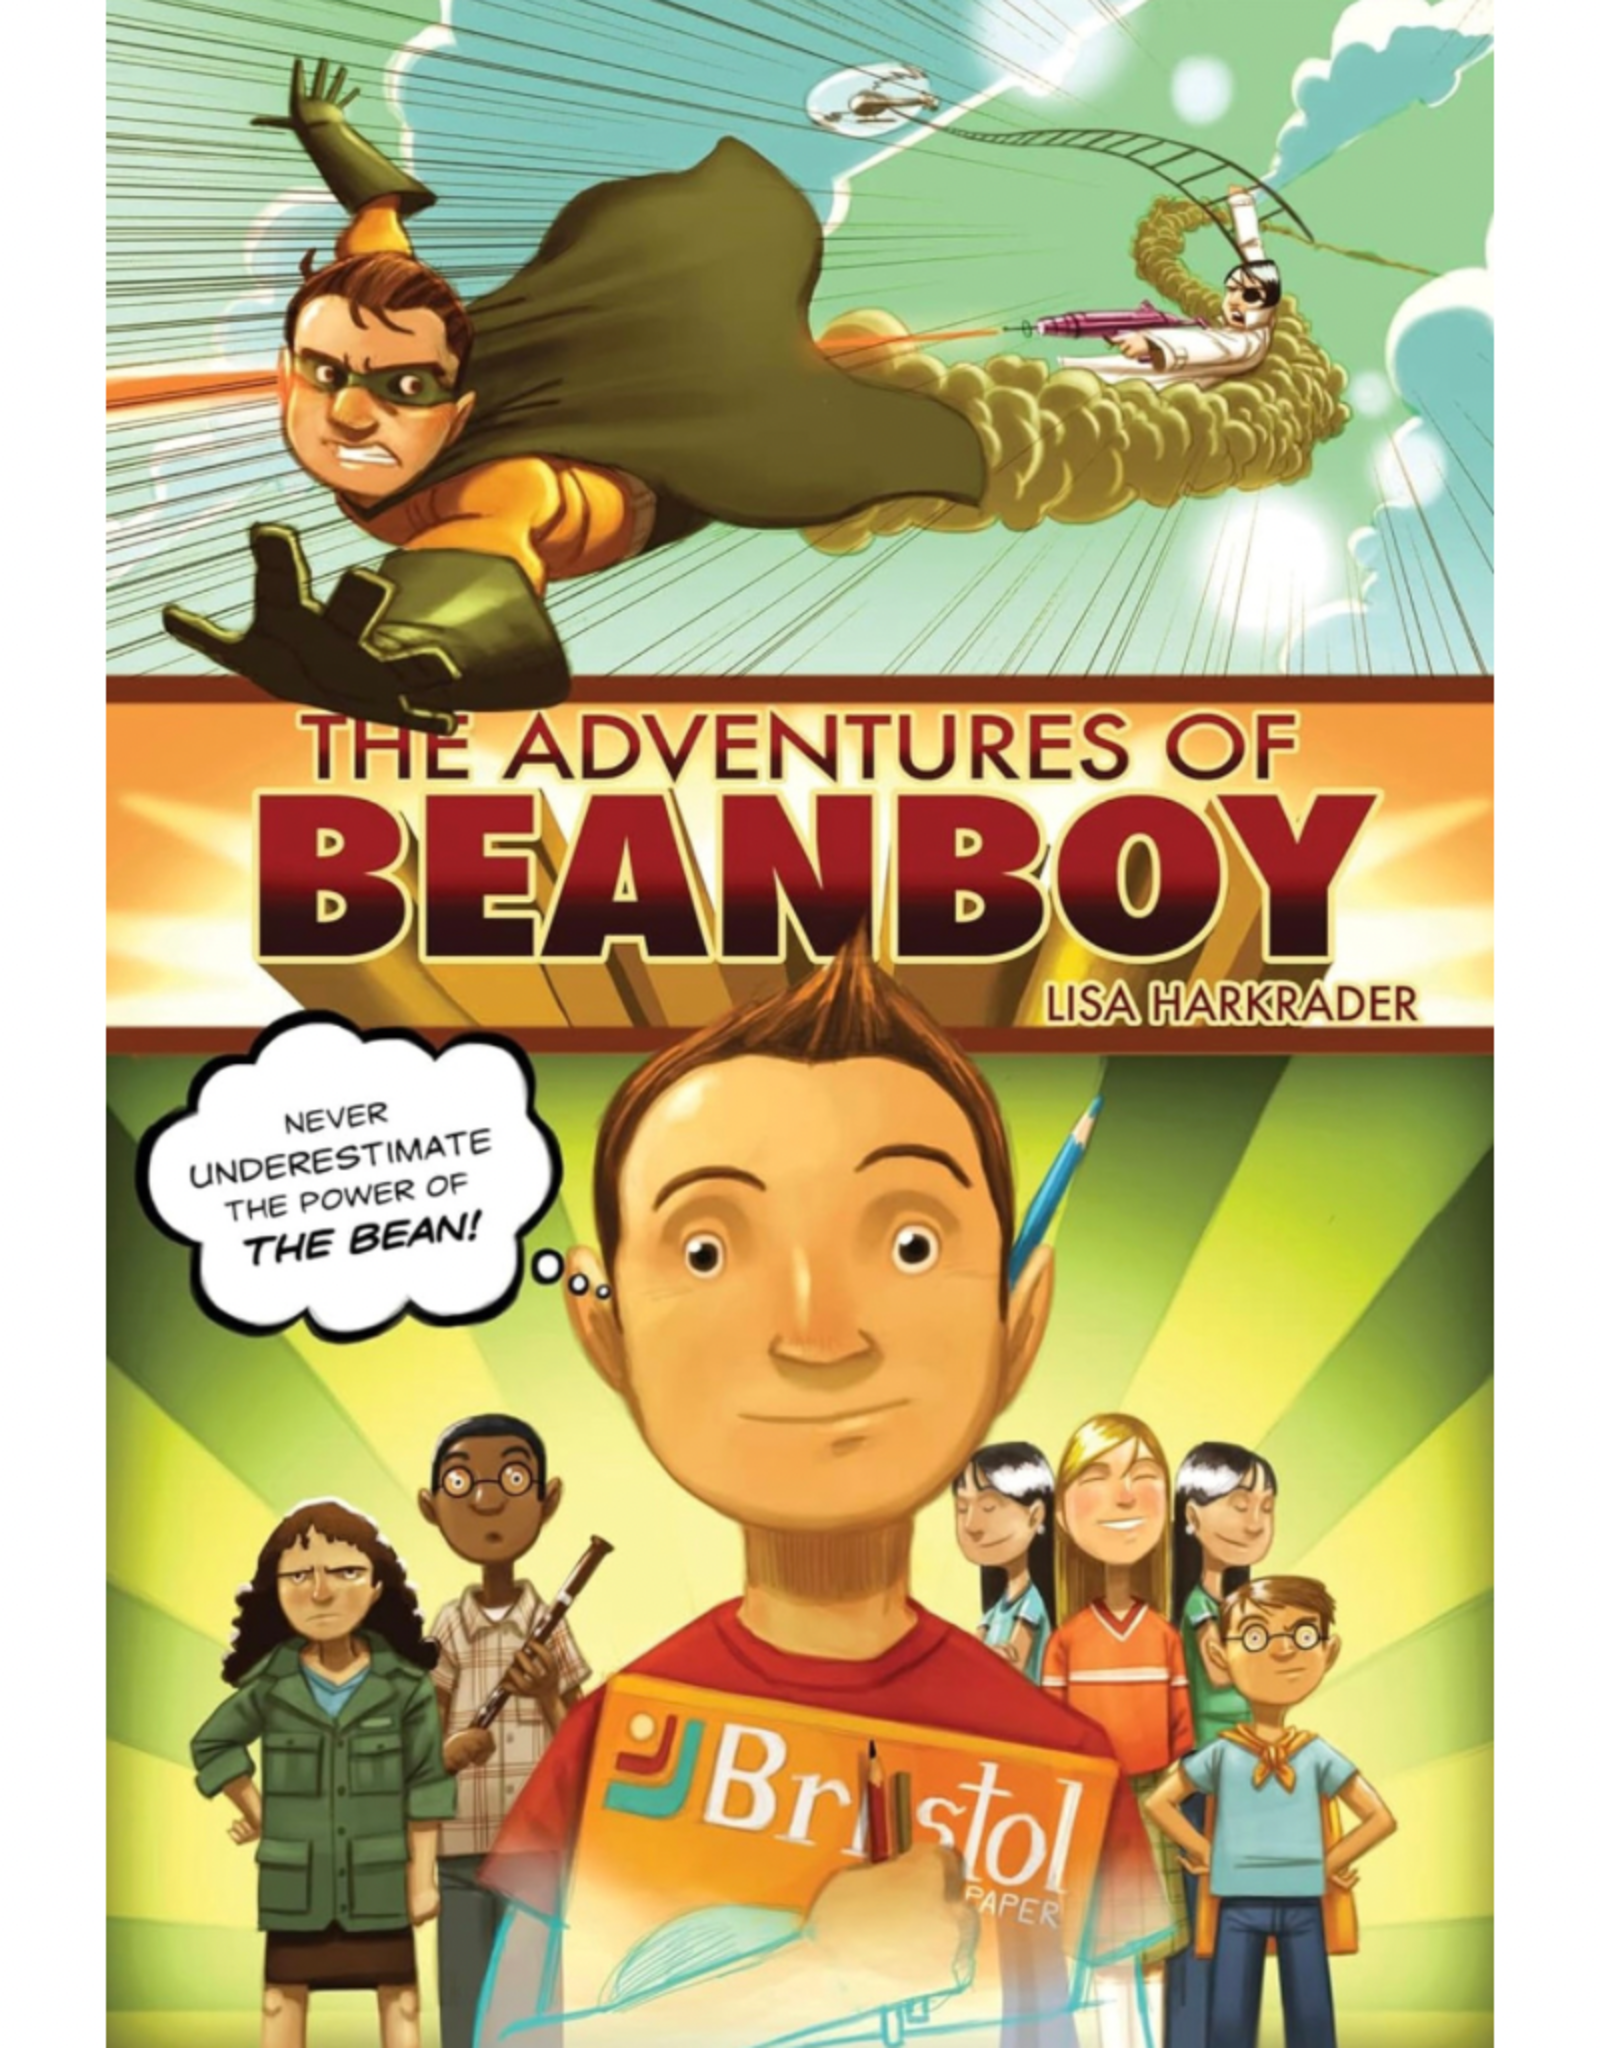 The Adventures of Beanboy